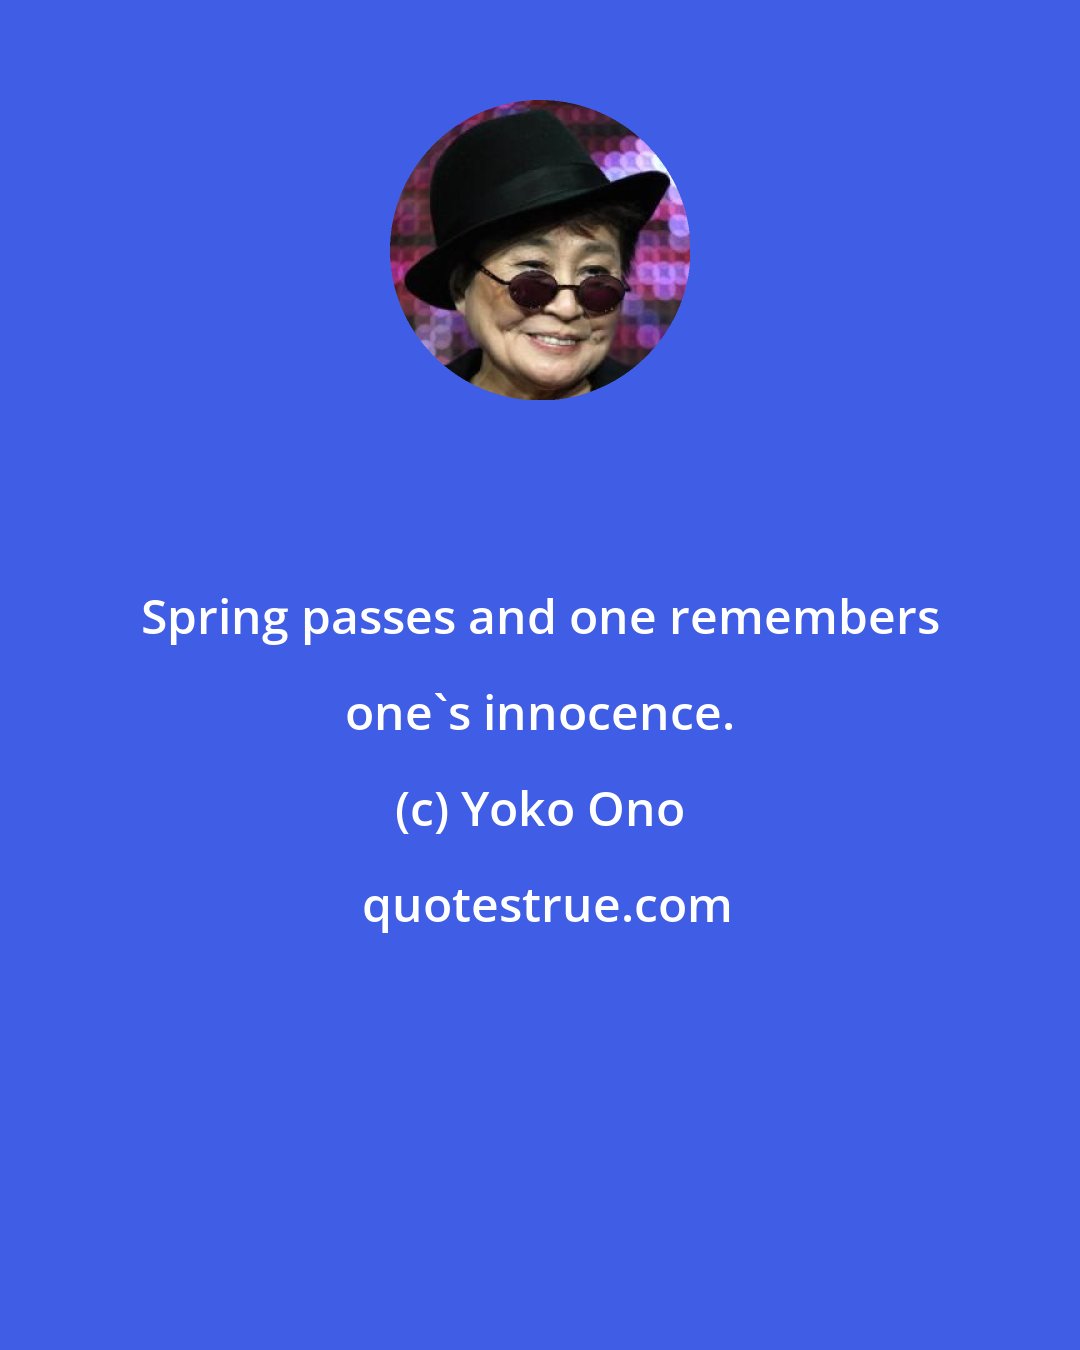 Yoko Ono: Spring passes and one remembers one's innocence.